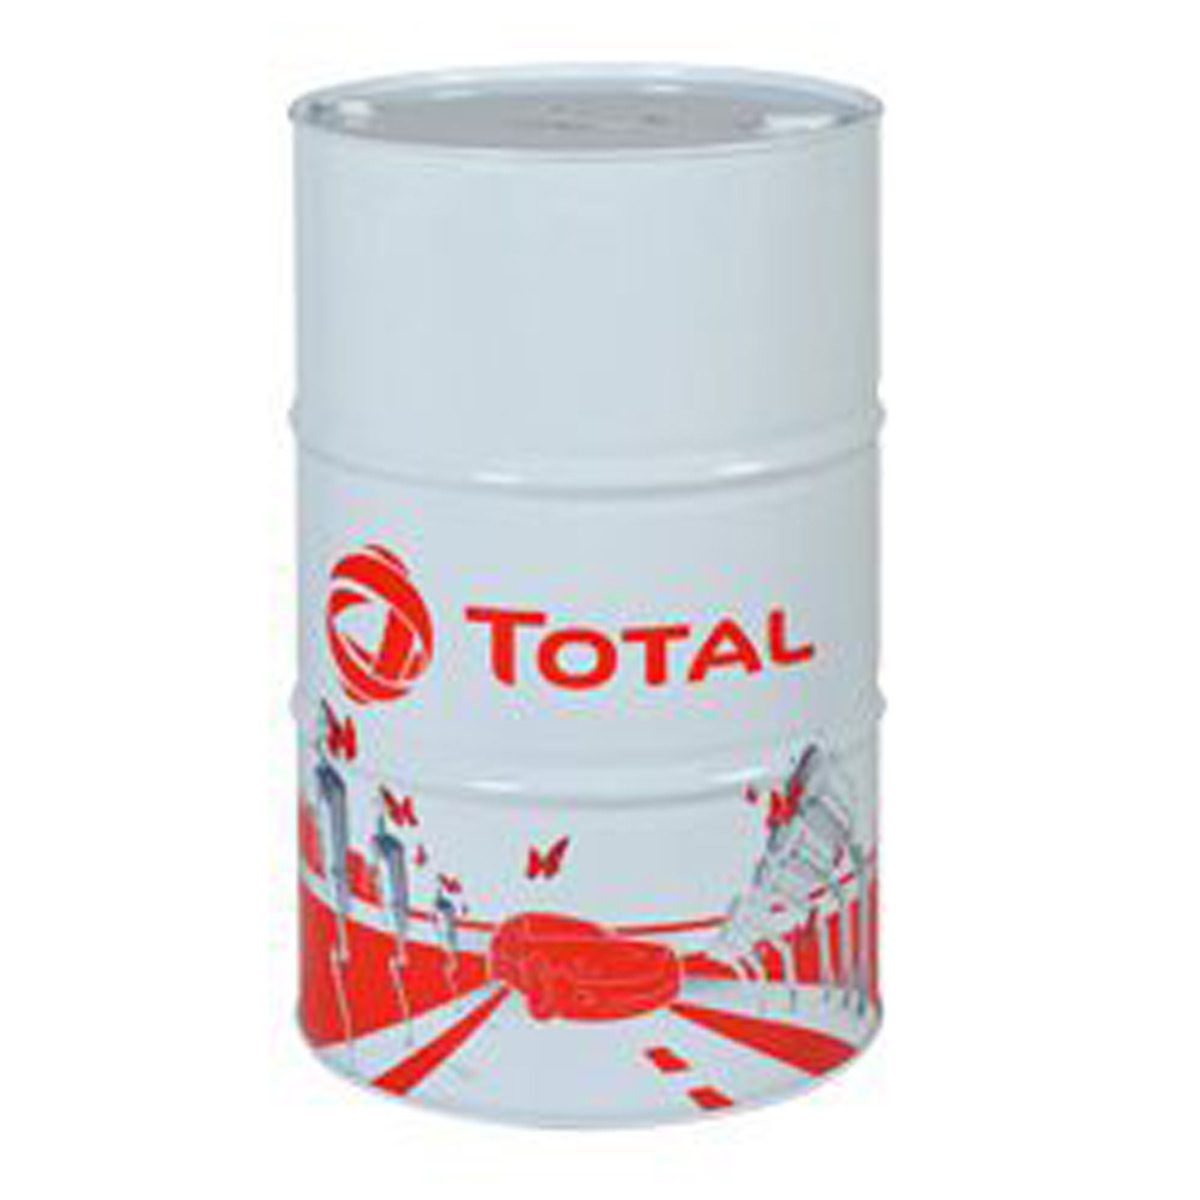 oil-lubricants-industrial-specialist-total-lubricants-prosylva-chainbar-plus-oil-208L-litre-high-speed-machineries-manual-or-mechanical-chainsaw-chain-conveyors-vjs-distributors-TOC16P